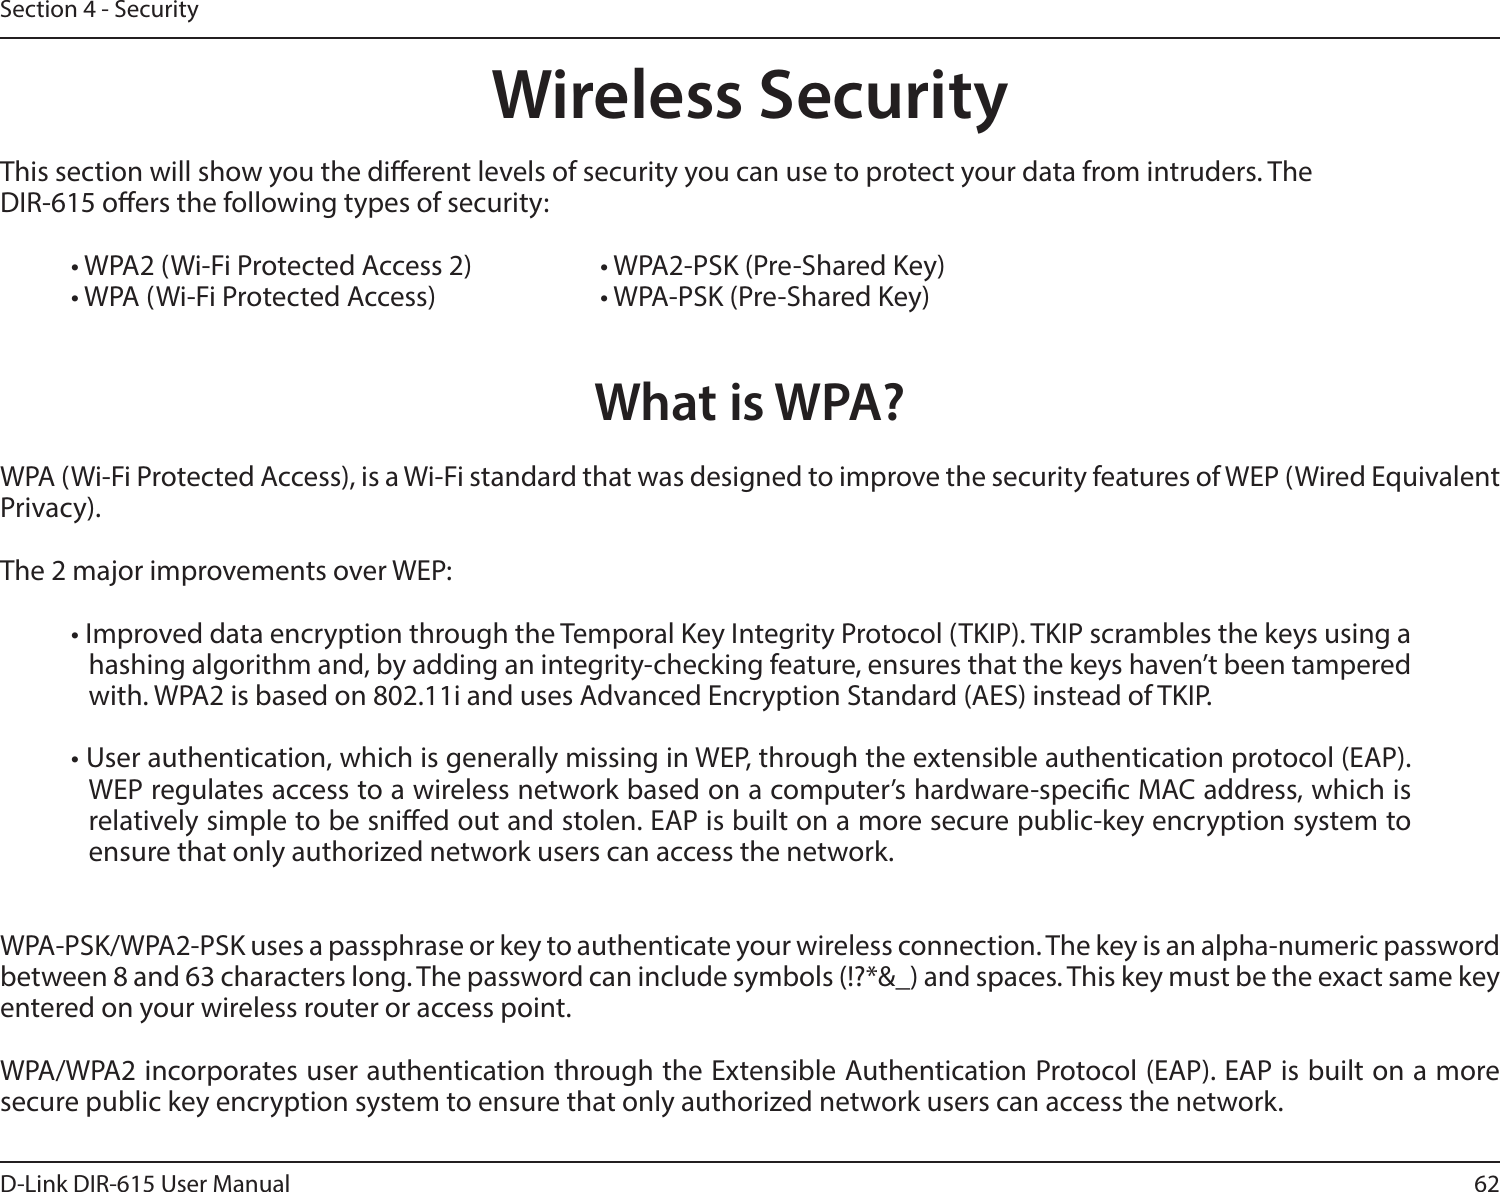 62D-Link DIR-615 User ManualSection 4 - SecurityWireless SecurityThis section will show you the dierent levels of security you can use to protect your data from intruders. The DIR-615 oers the following types of security:• WPA2 (Wi-Fi Protected Access 2)     • WPA2-PSK (Pre-Shared Key)• WPA (Wi-Fi Protected Access)      • WPA-PSK (Pre-Shared Key)What is WPA?WPA (Wi-Fi Protected Access), is a Wi-Fi standard that was designed to improve the security features of WEP (Wired Equivalent Privacy).  The 2 major improvements over WEP: • Improved data encryption through the Temporal Key Integrity Protocol (TKIP). TKIP scrambles the keys using a hashing algorithm and, by adding an integrity-checking feature, ensures that the keys haven’t been tampered with. WPA2 is based on 802.11i and uses Advanced Encryption Standard (AES) instead of TKIP.• User authentication, which is generally missing in WEP, through the extensible authentication protocol (EAP). WEP regulates access to a wireless network based on a computer’s hardware-specic MAC address, which is relatively simple to be snied out and stolen. EAP is built on a more secure public-key encryption system to ensure that only authorized network users can access the network.WPA-PSK/WPA2-PSK uses a passphrase or key to authenticate your wireless connection. The key is an alpha-numeric password between 8 and 63 characters long. The password can include symbols (!?*&amp;_) and spaces. This key must be the exact same key entered on your wireless router or access point.WPA/WPA2 incorporates user authentication through the Extensible Authentication Protocol (EAP). EAP is built on a more secure public key encryption system to ensure that only authorized network users can access the network.